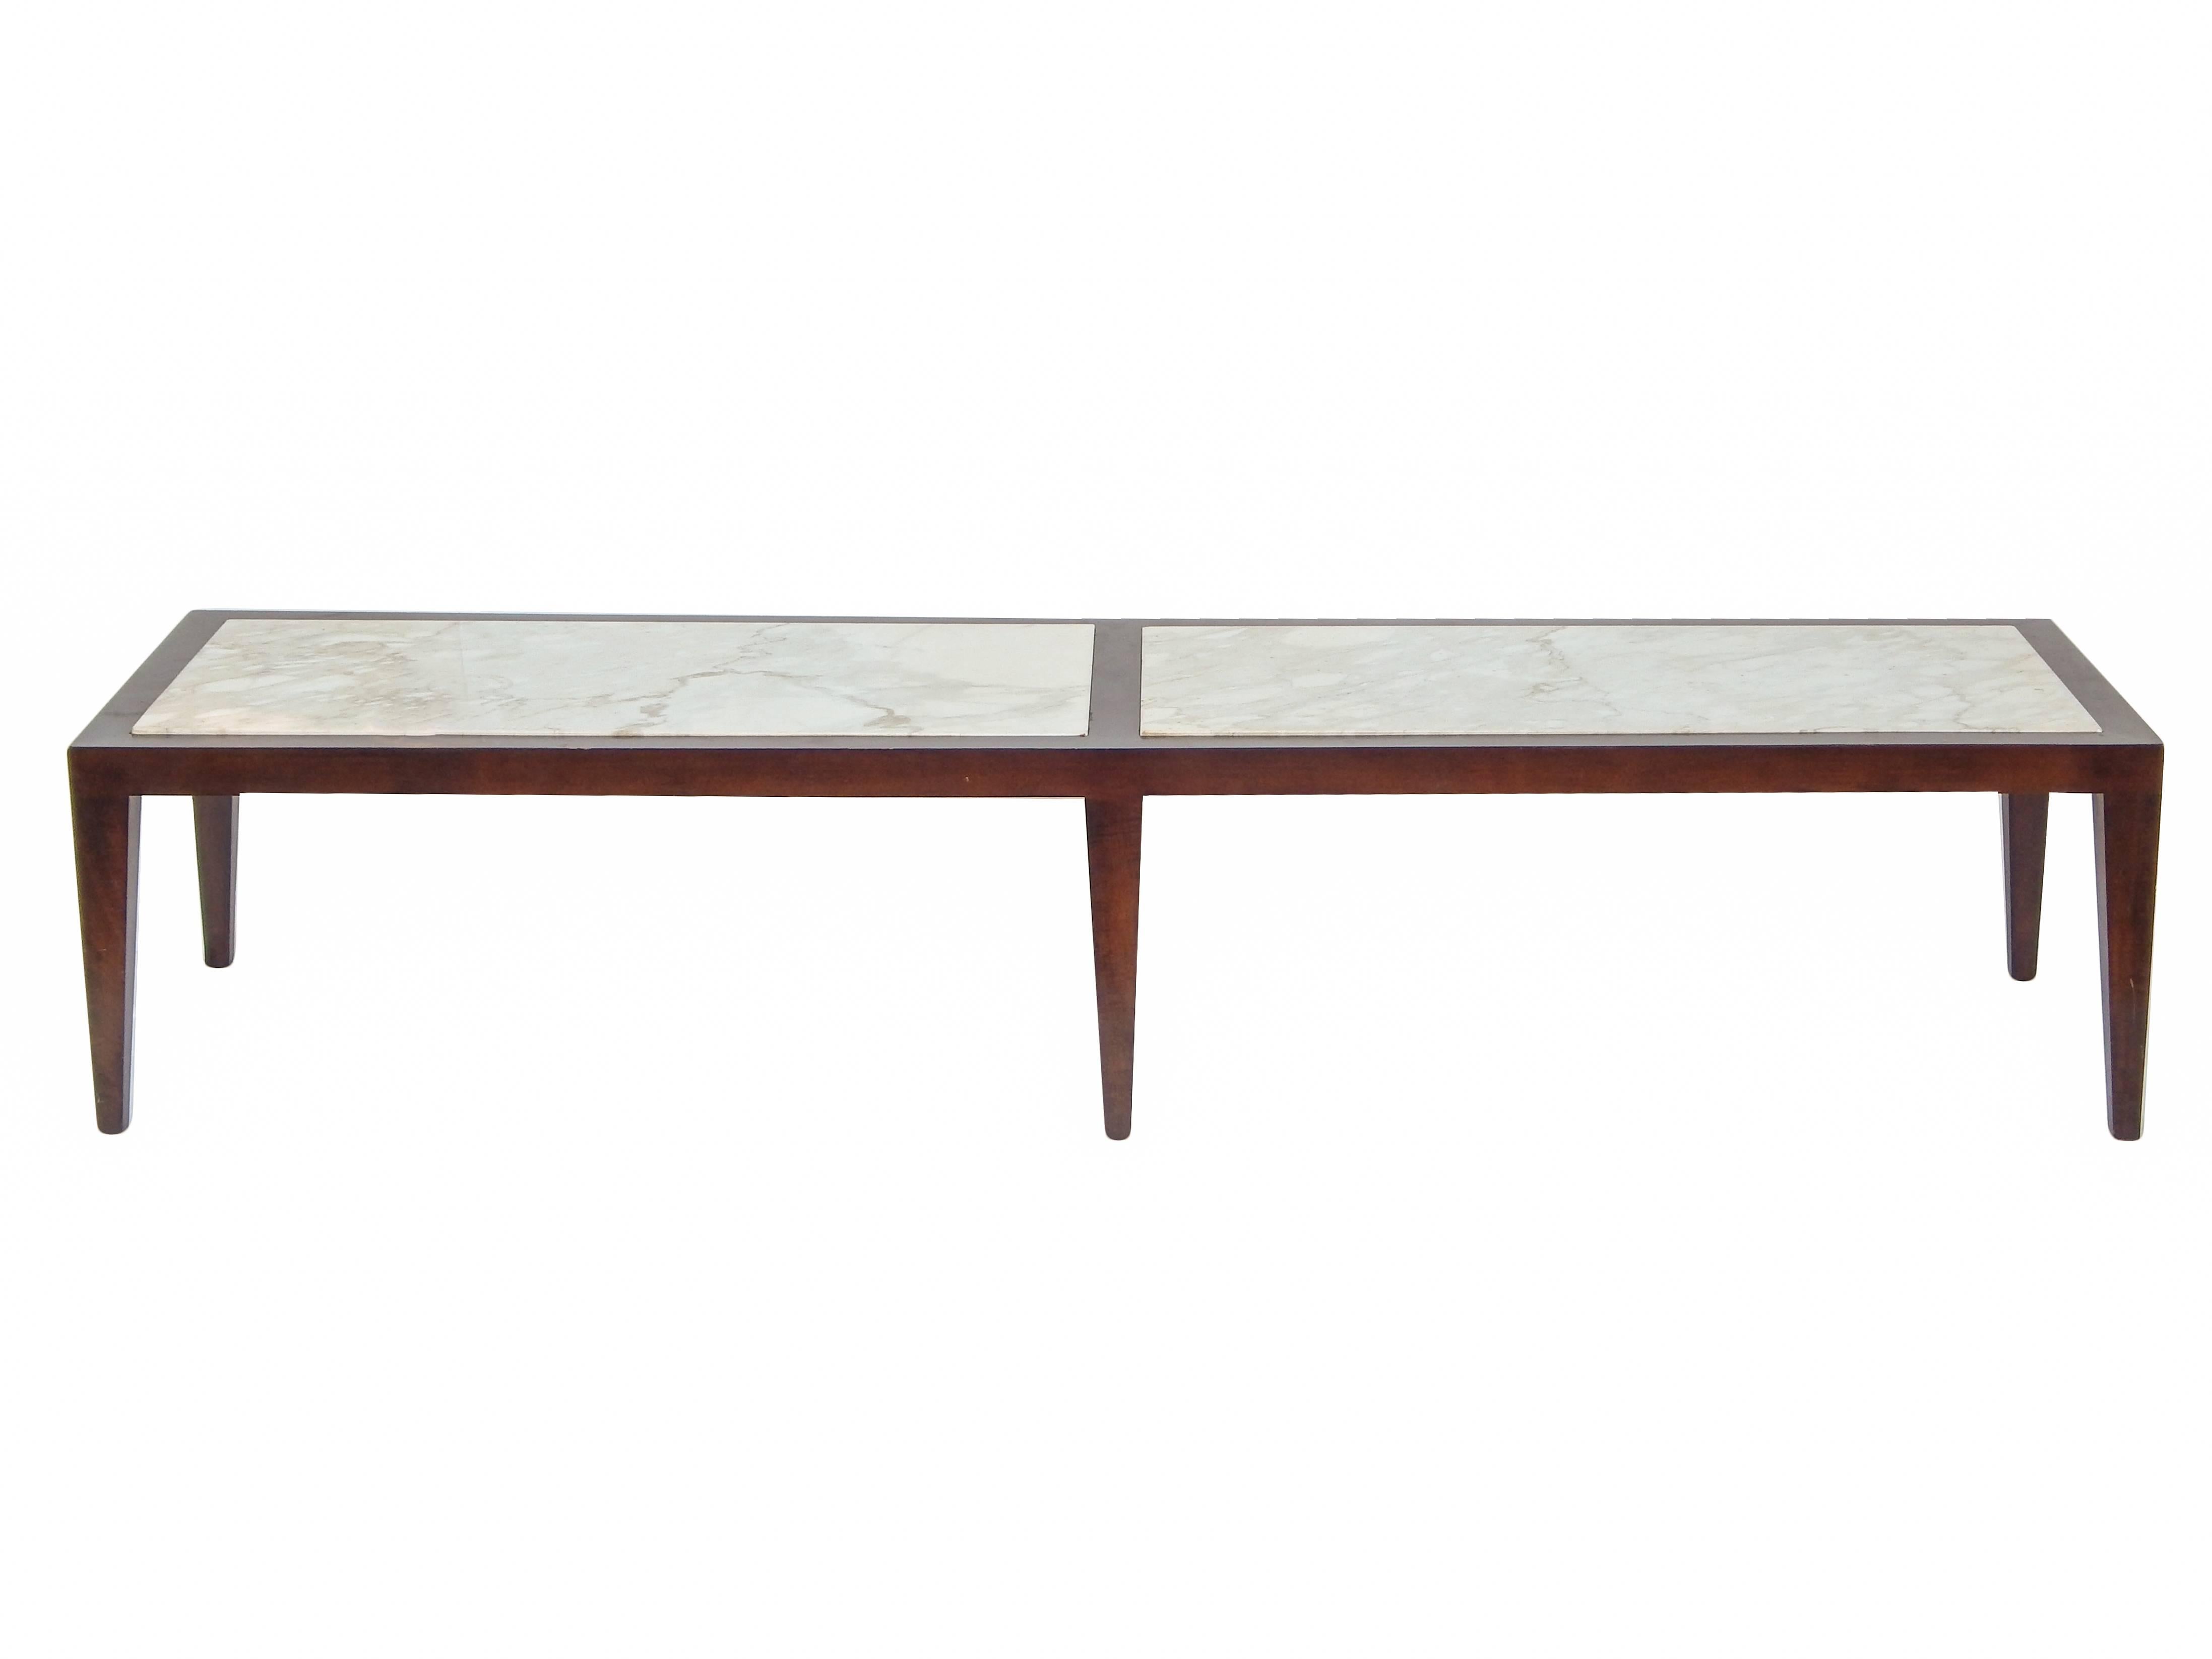 Harvey Probber style marble-top coffee table with dark wood frame.